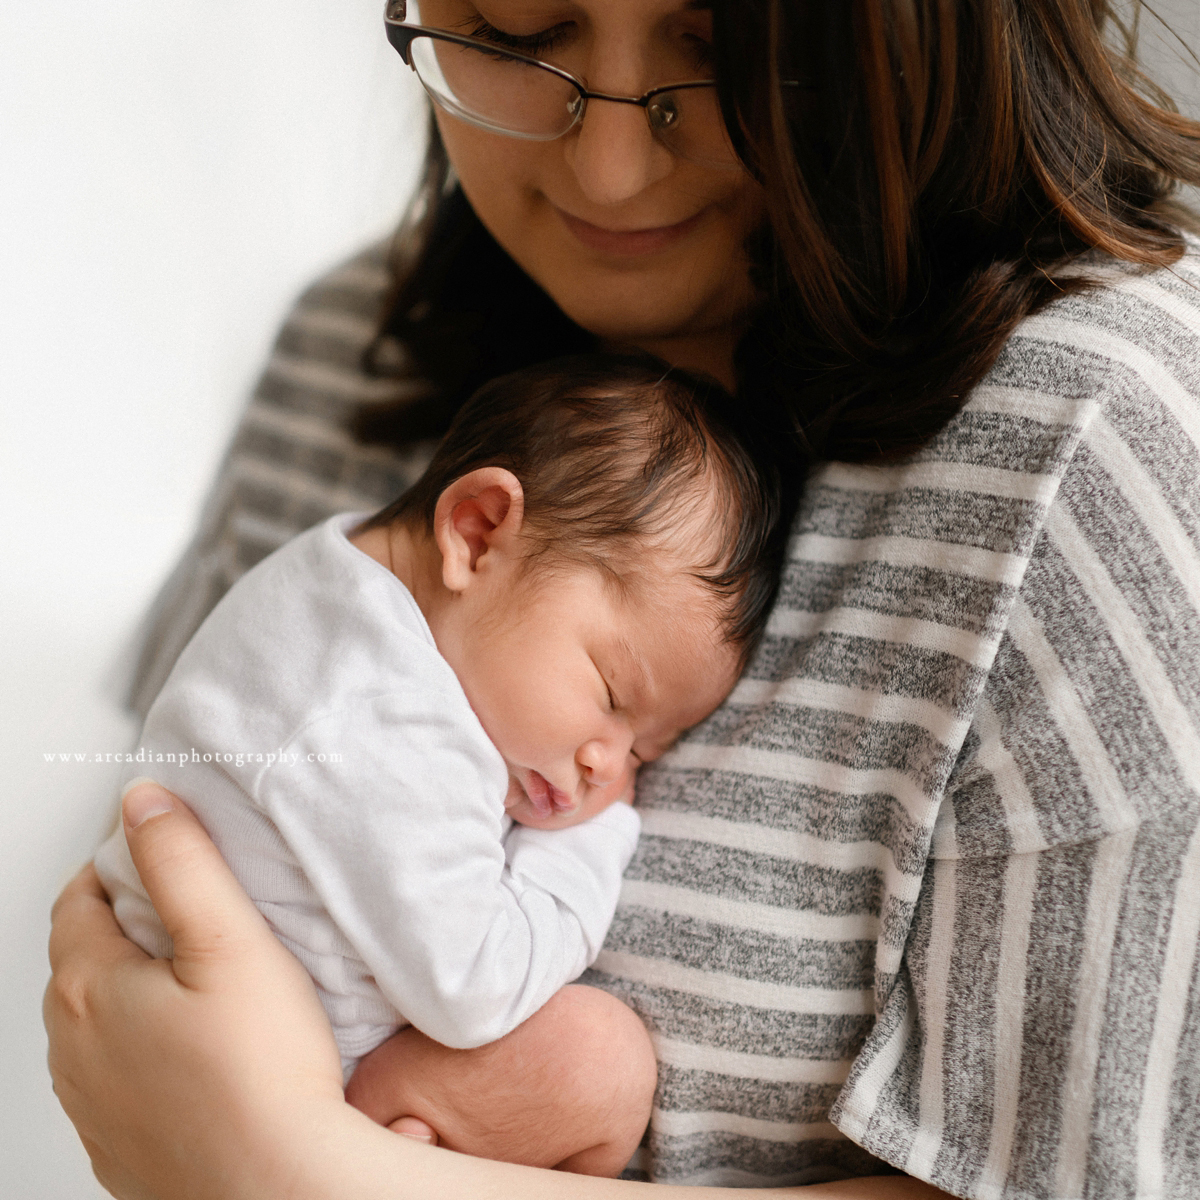 Snug as a bug - learn more about booking newborn photos.